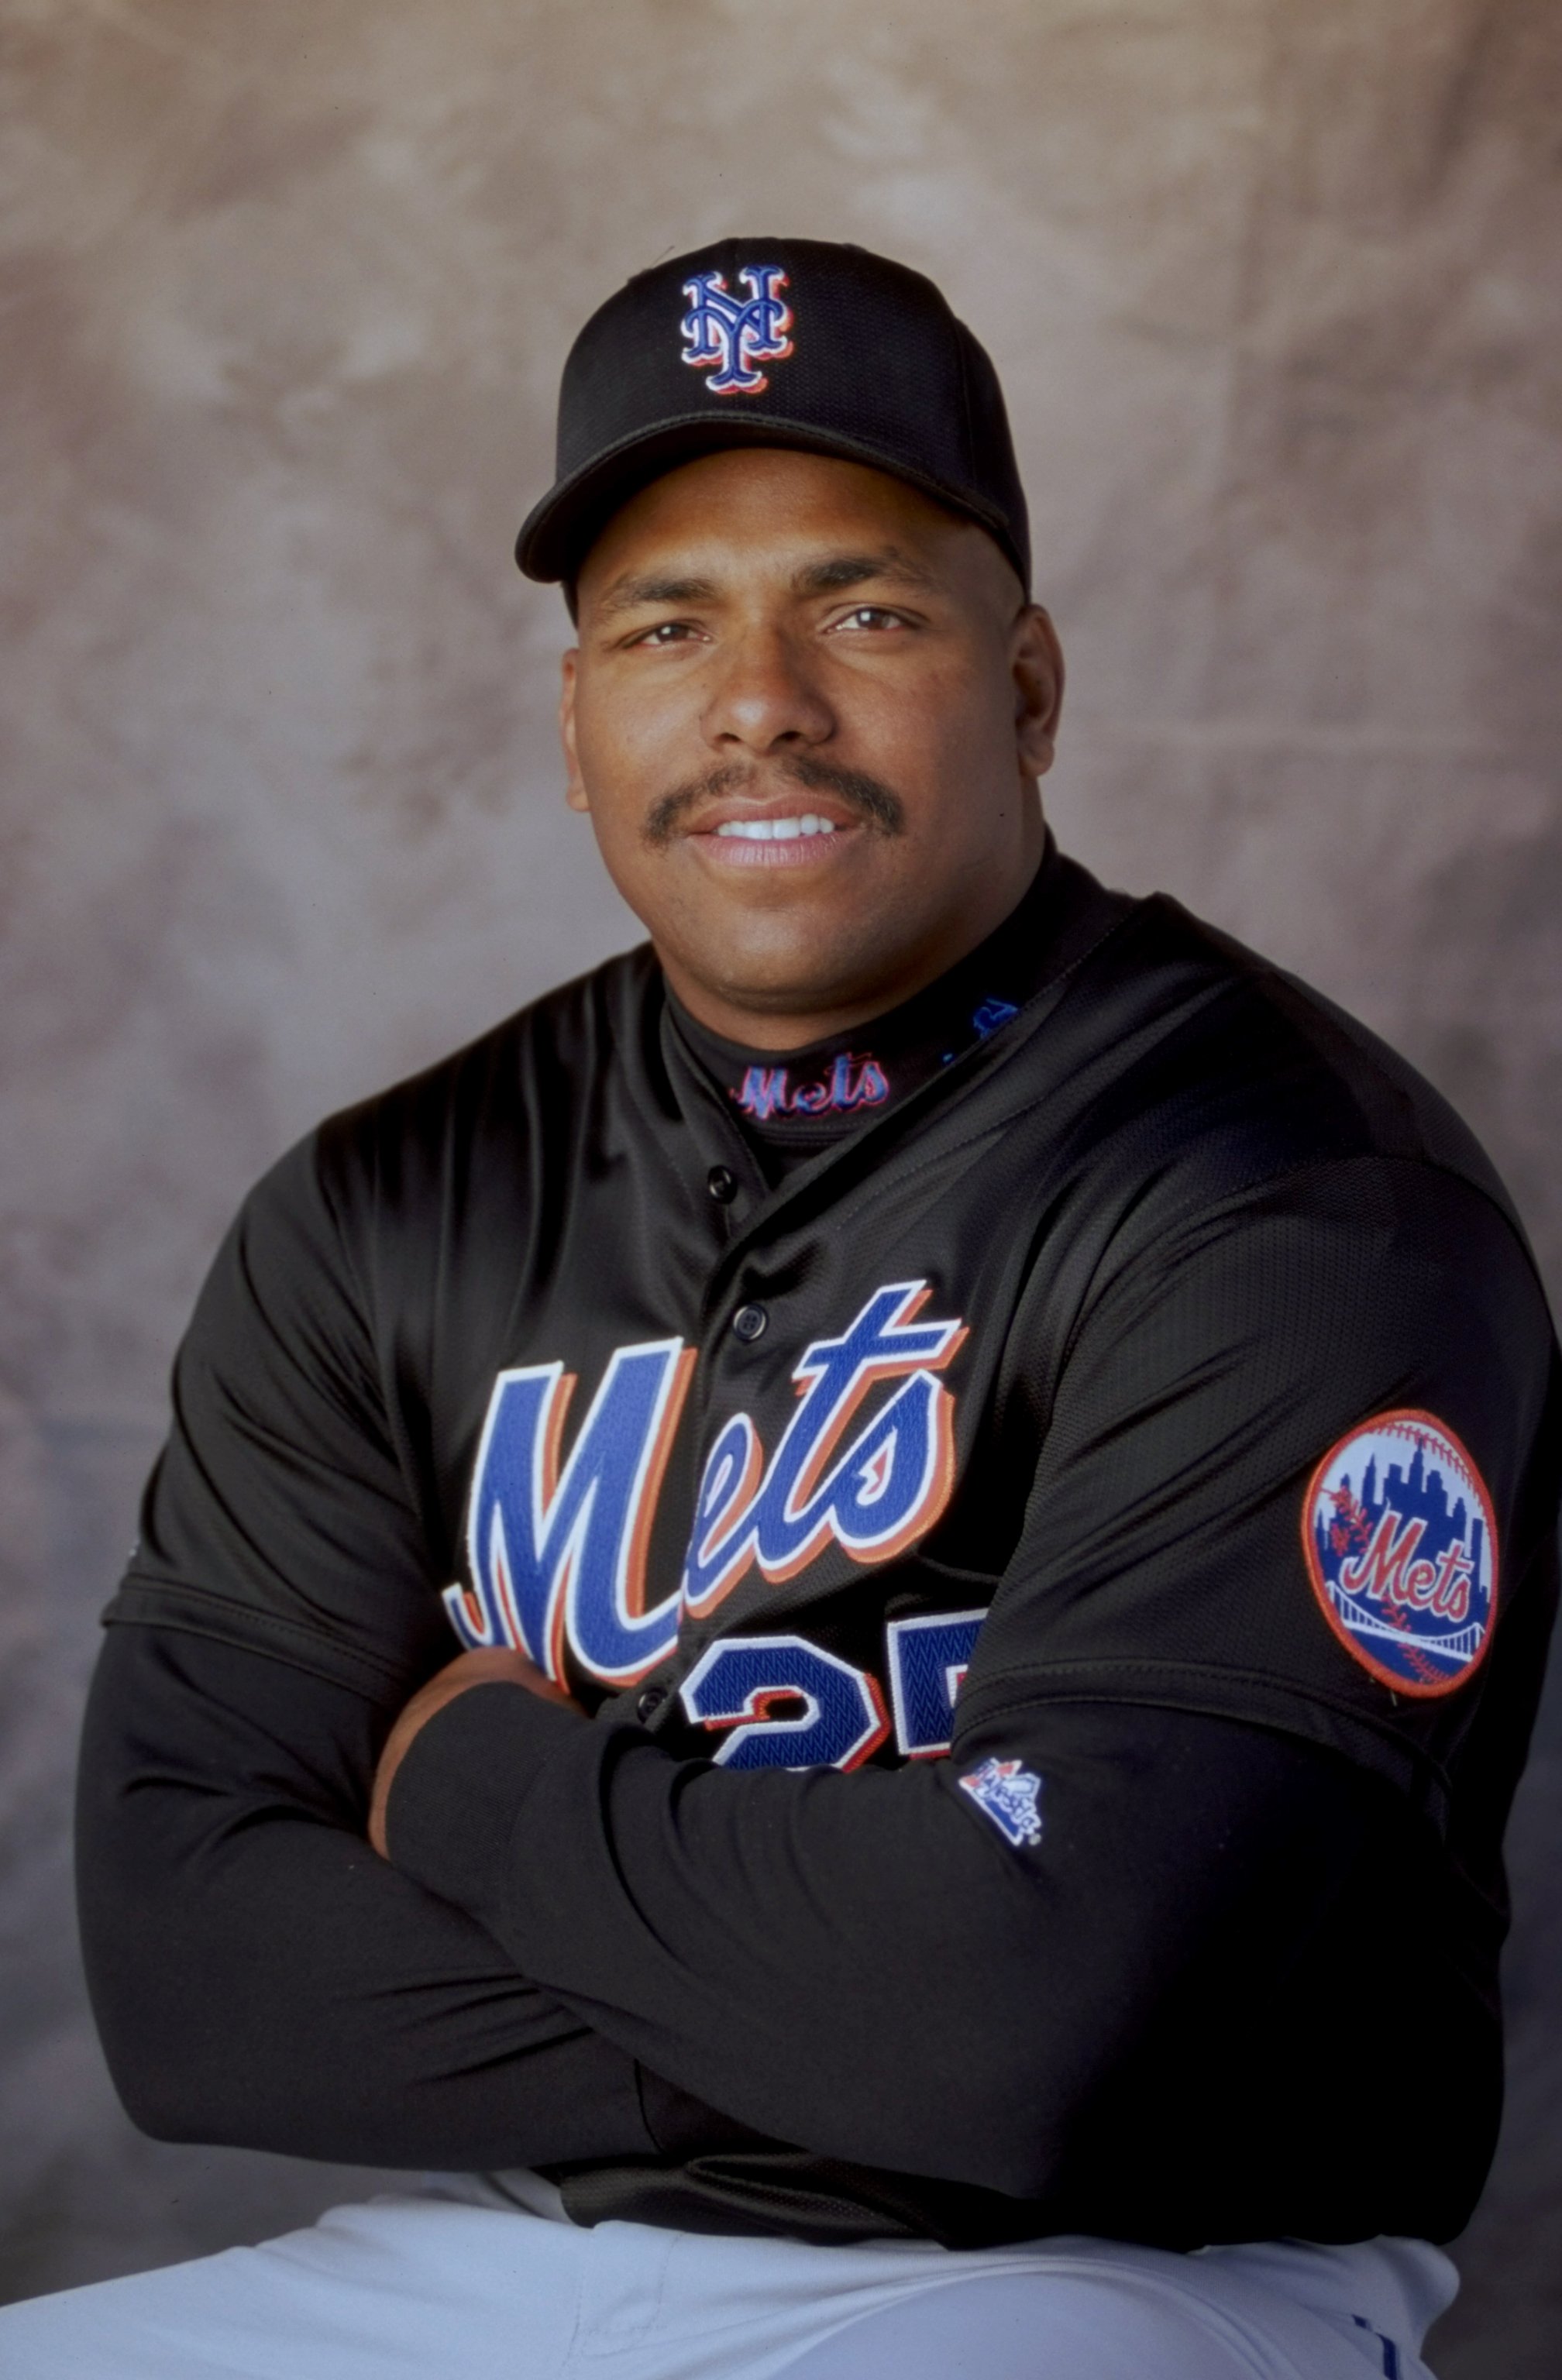 New York Mets' black uniforms have been controversial since 1998